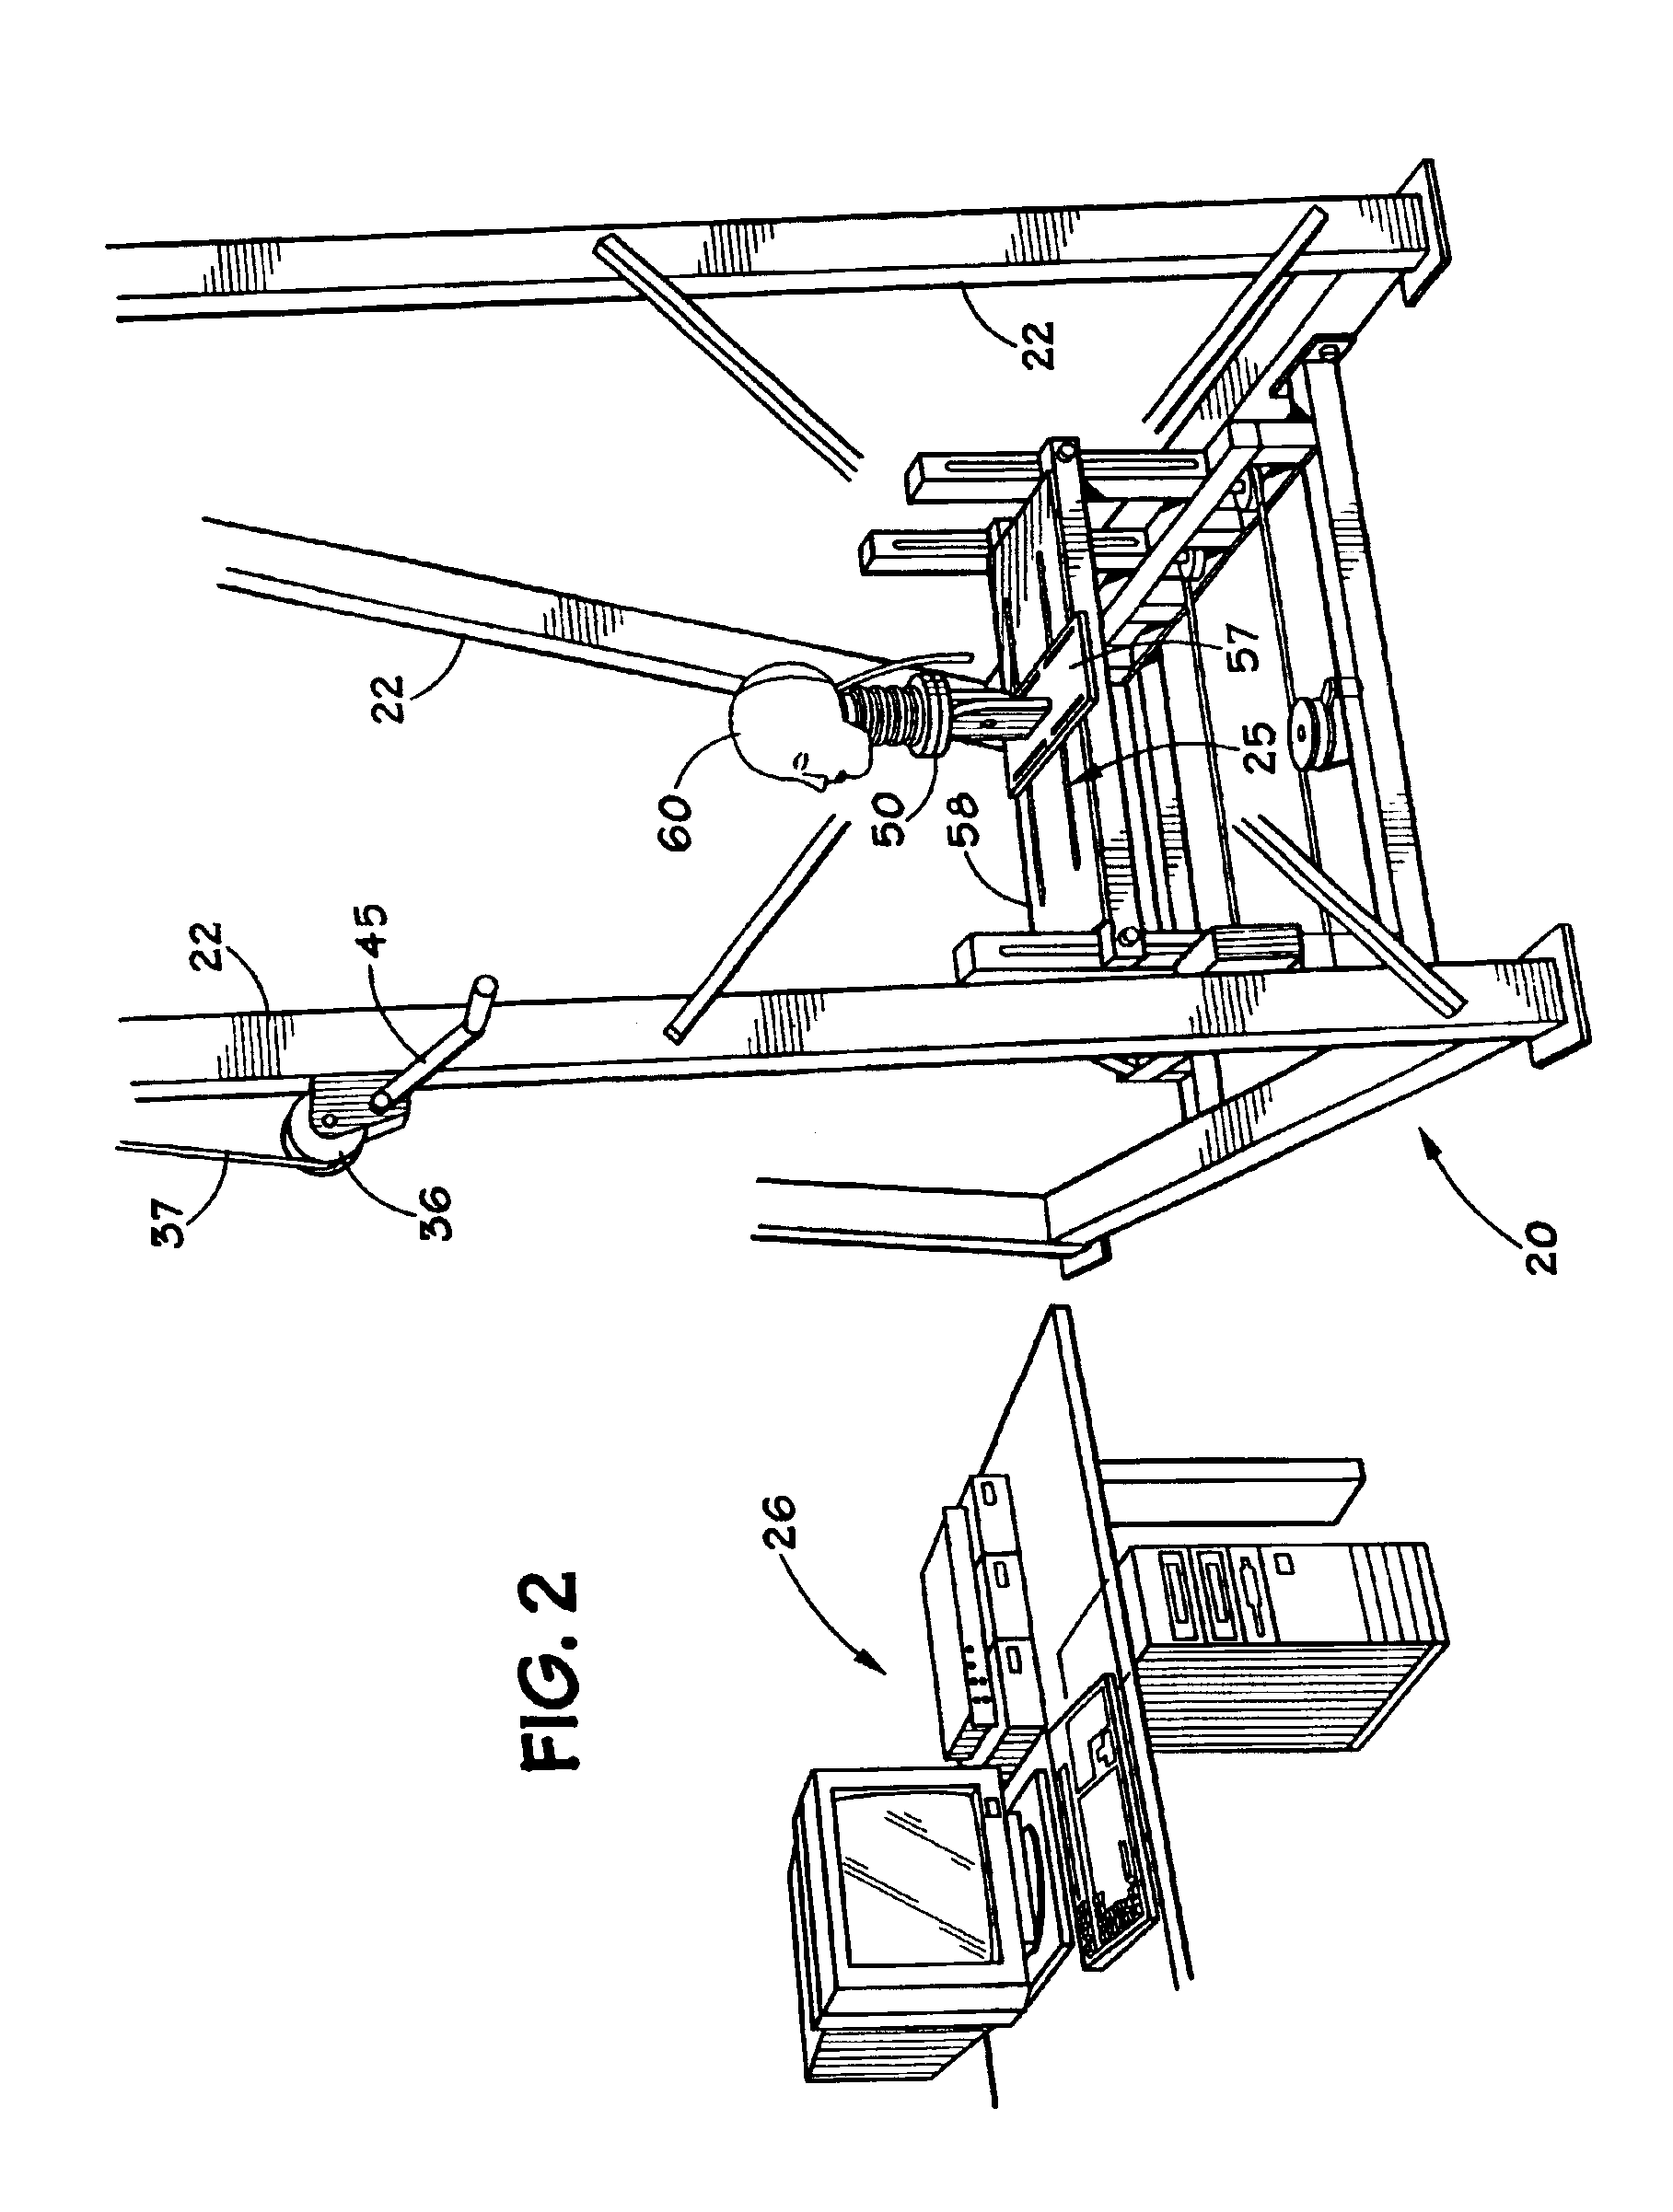 Method and apparatus for testing football helmets